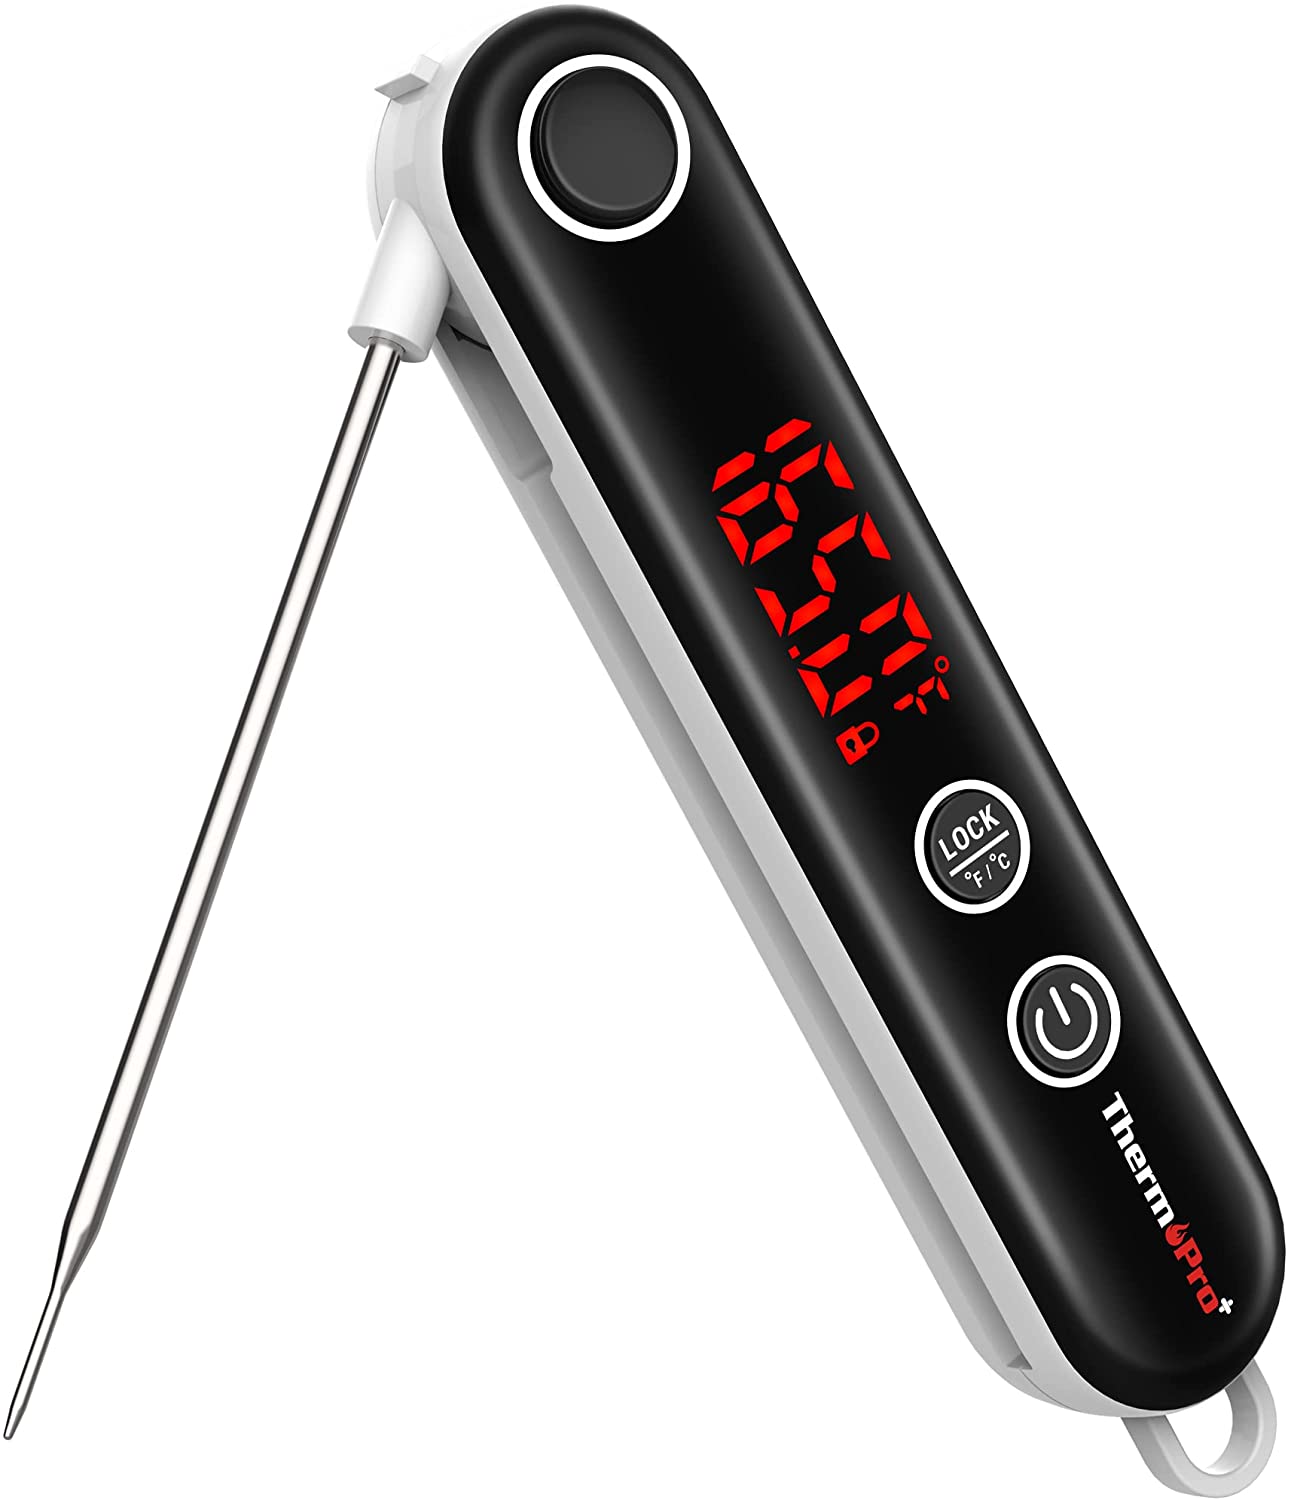 Thermopro digital instant read meat thermometer